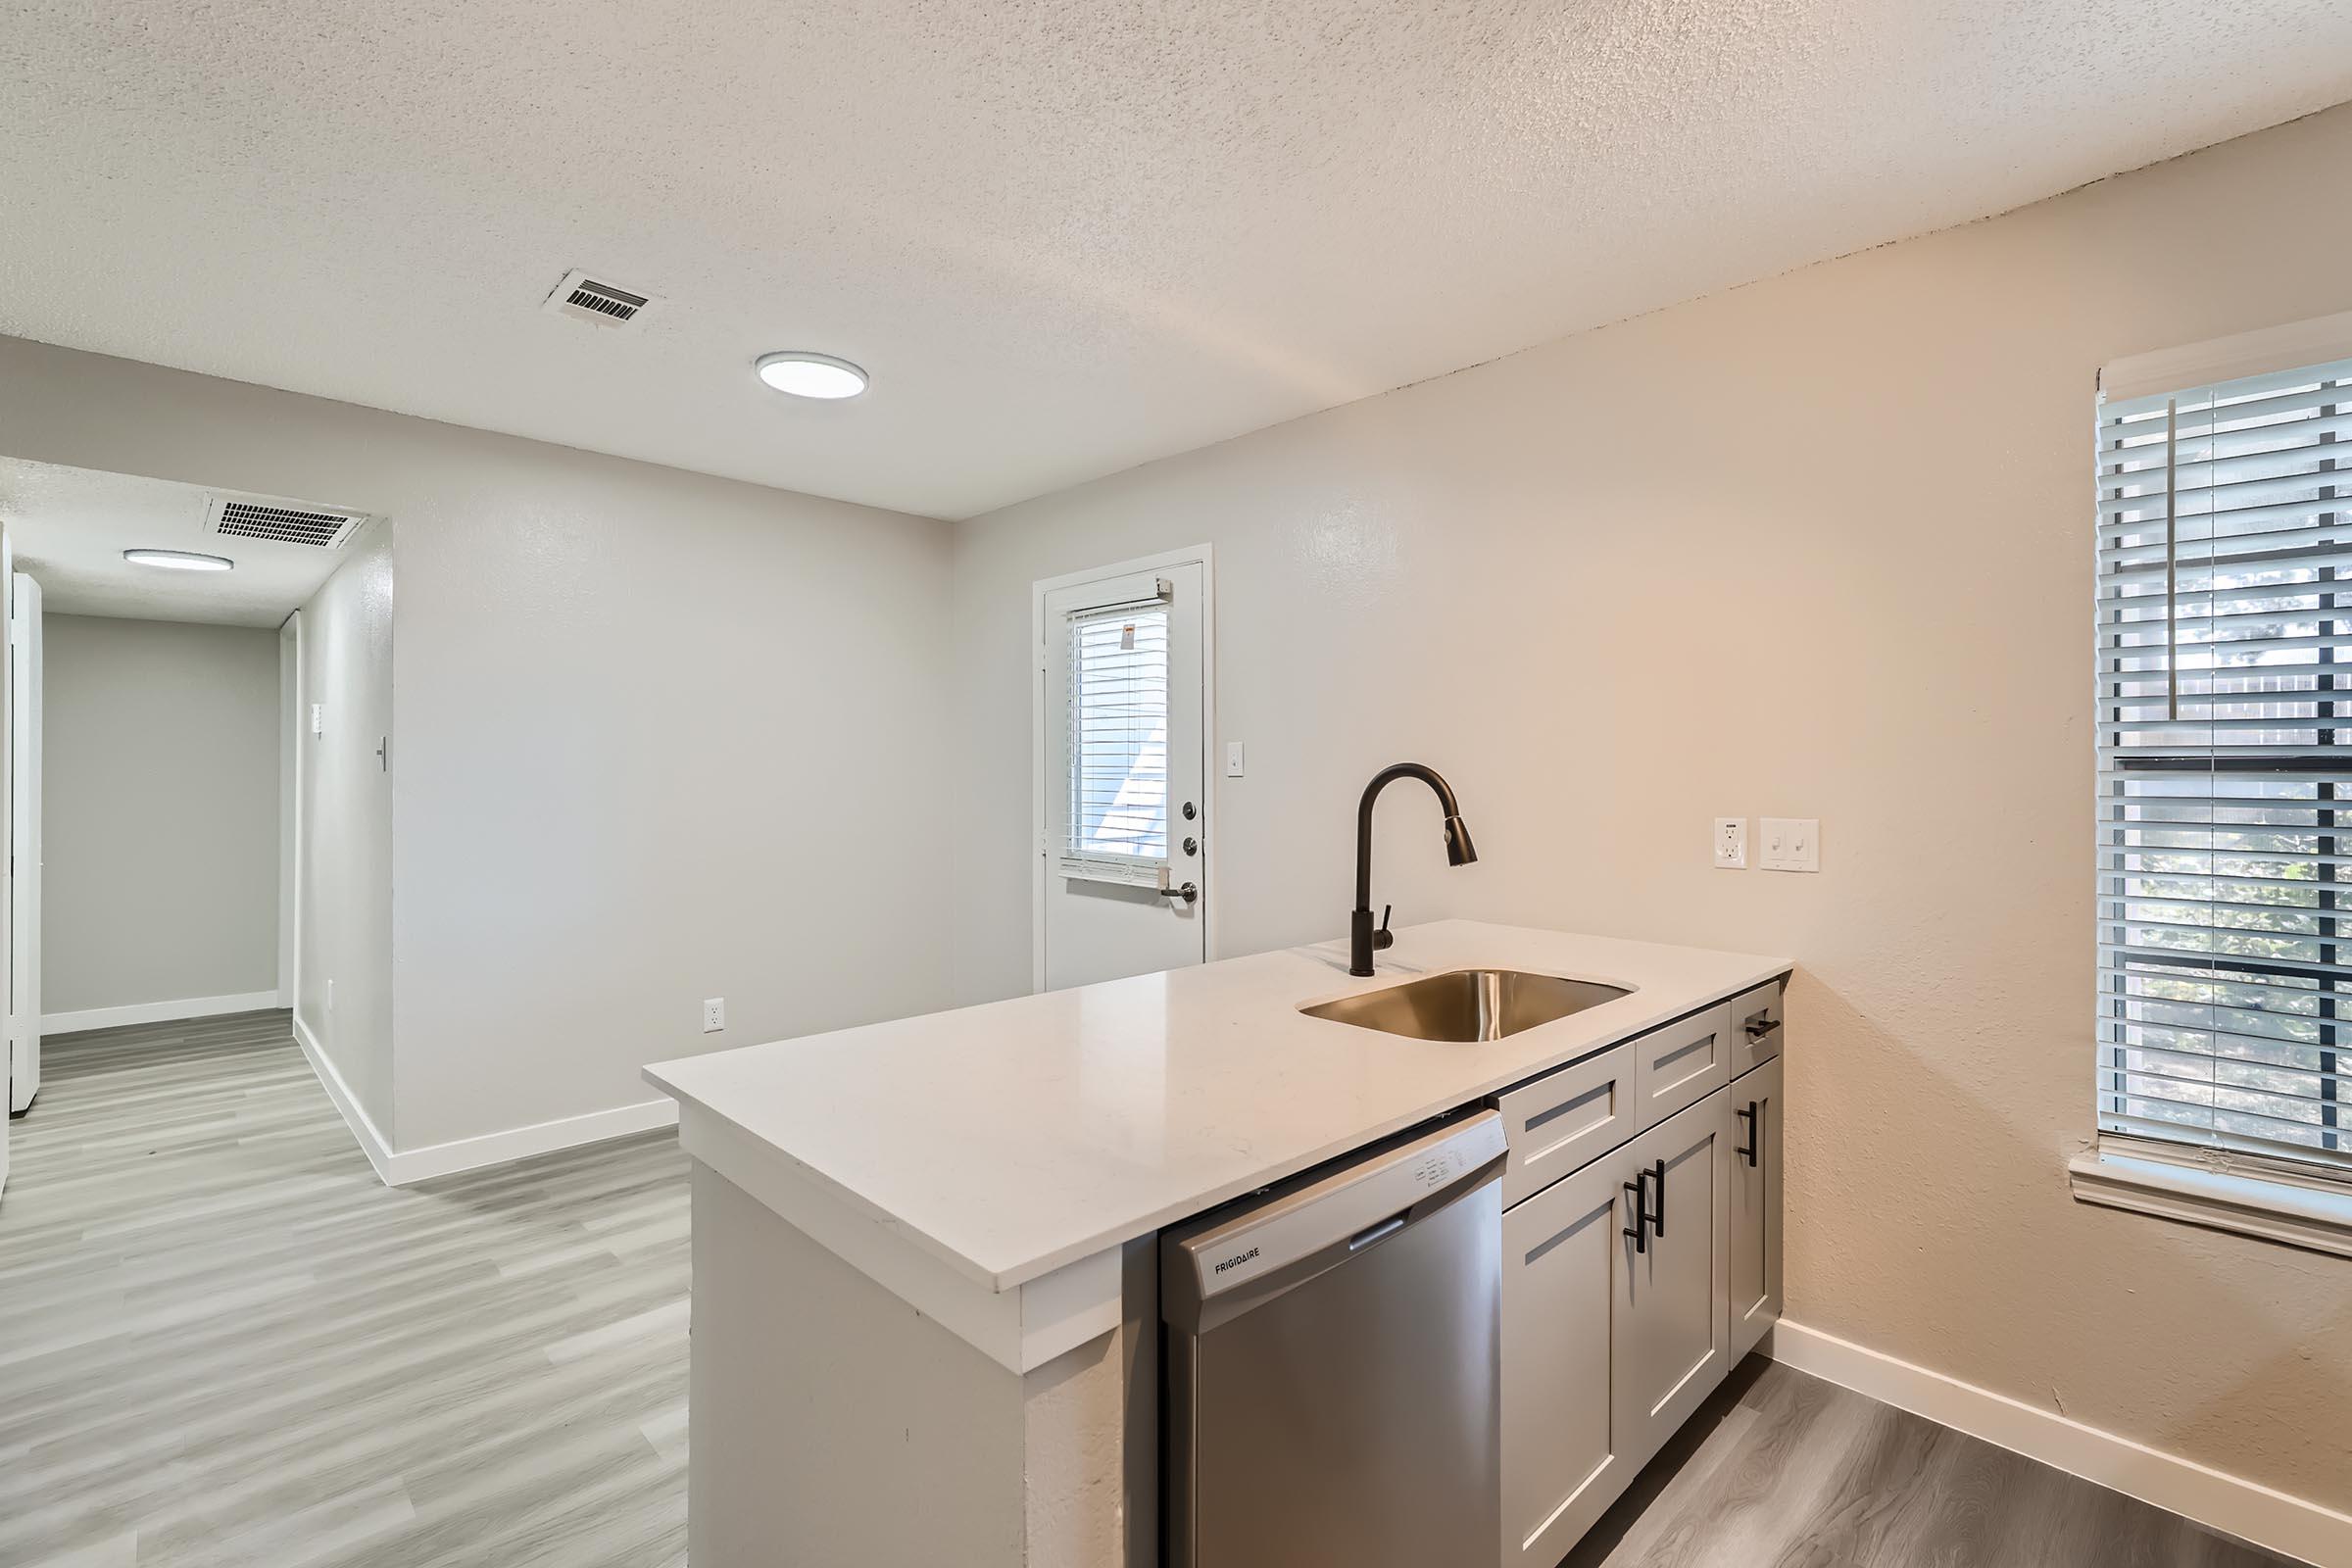 An apartment kitchen with a quartz countertop near the dining area at Rise Oak Creek.